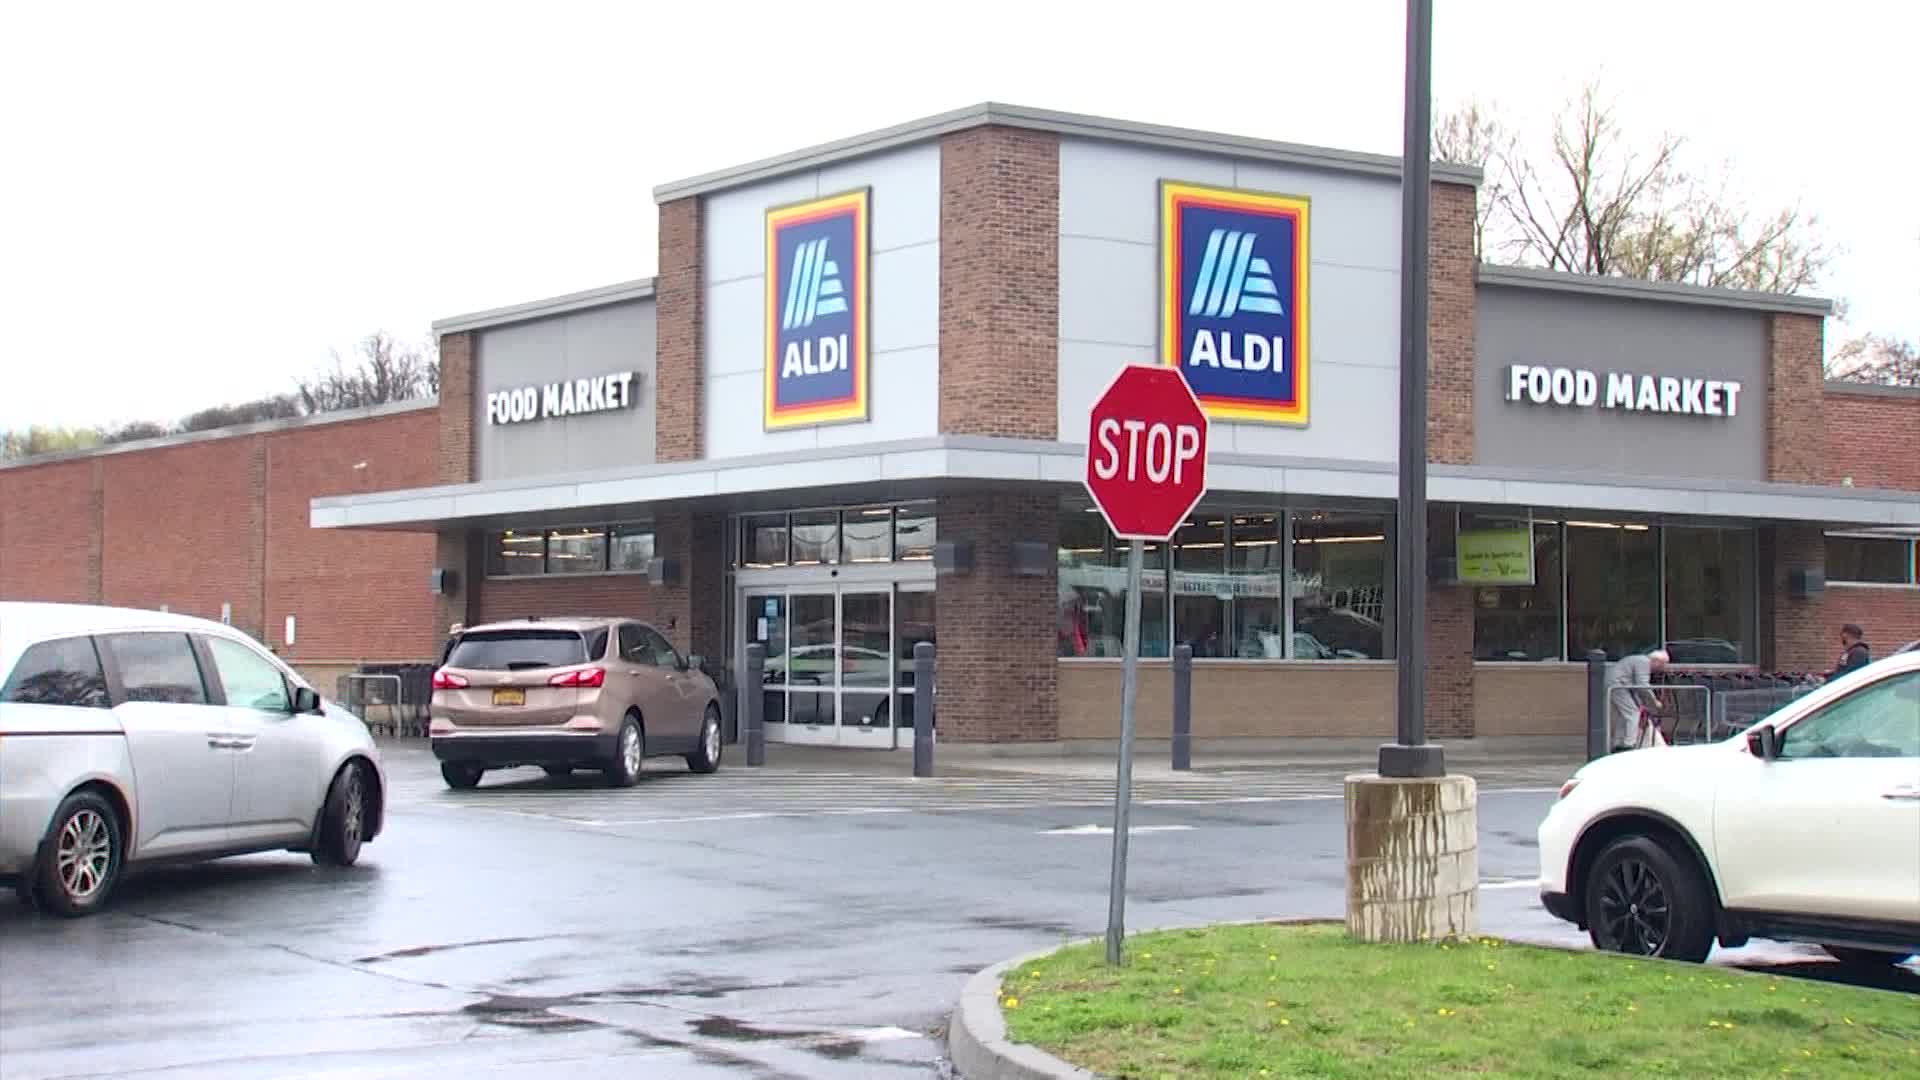 Aldi on Central Avenue passes reinspection after failing first one